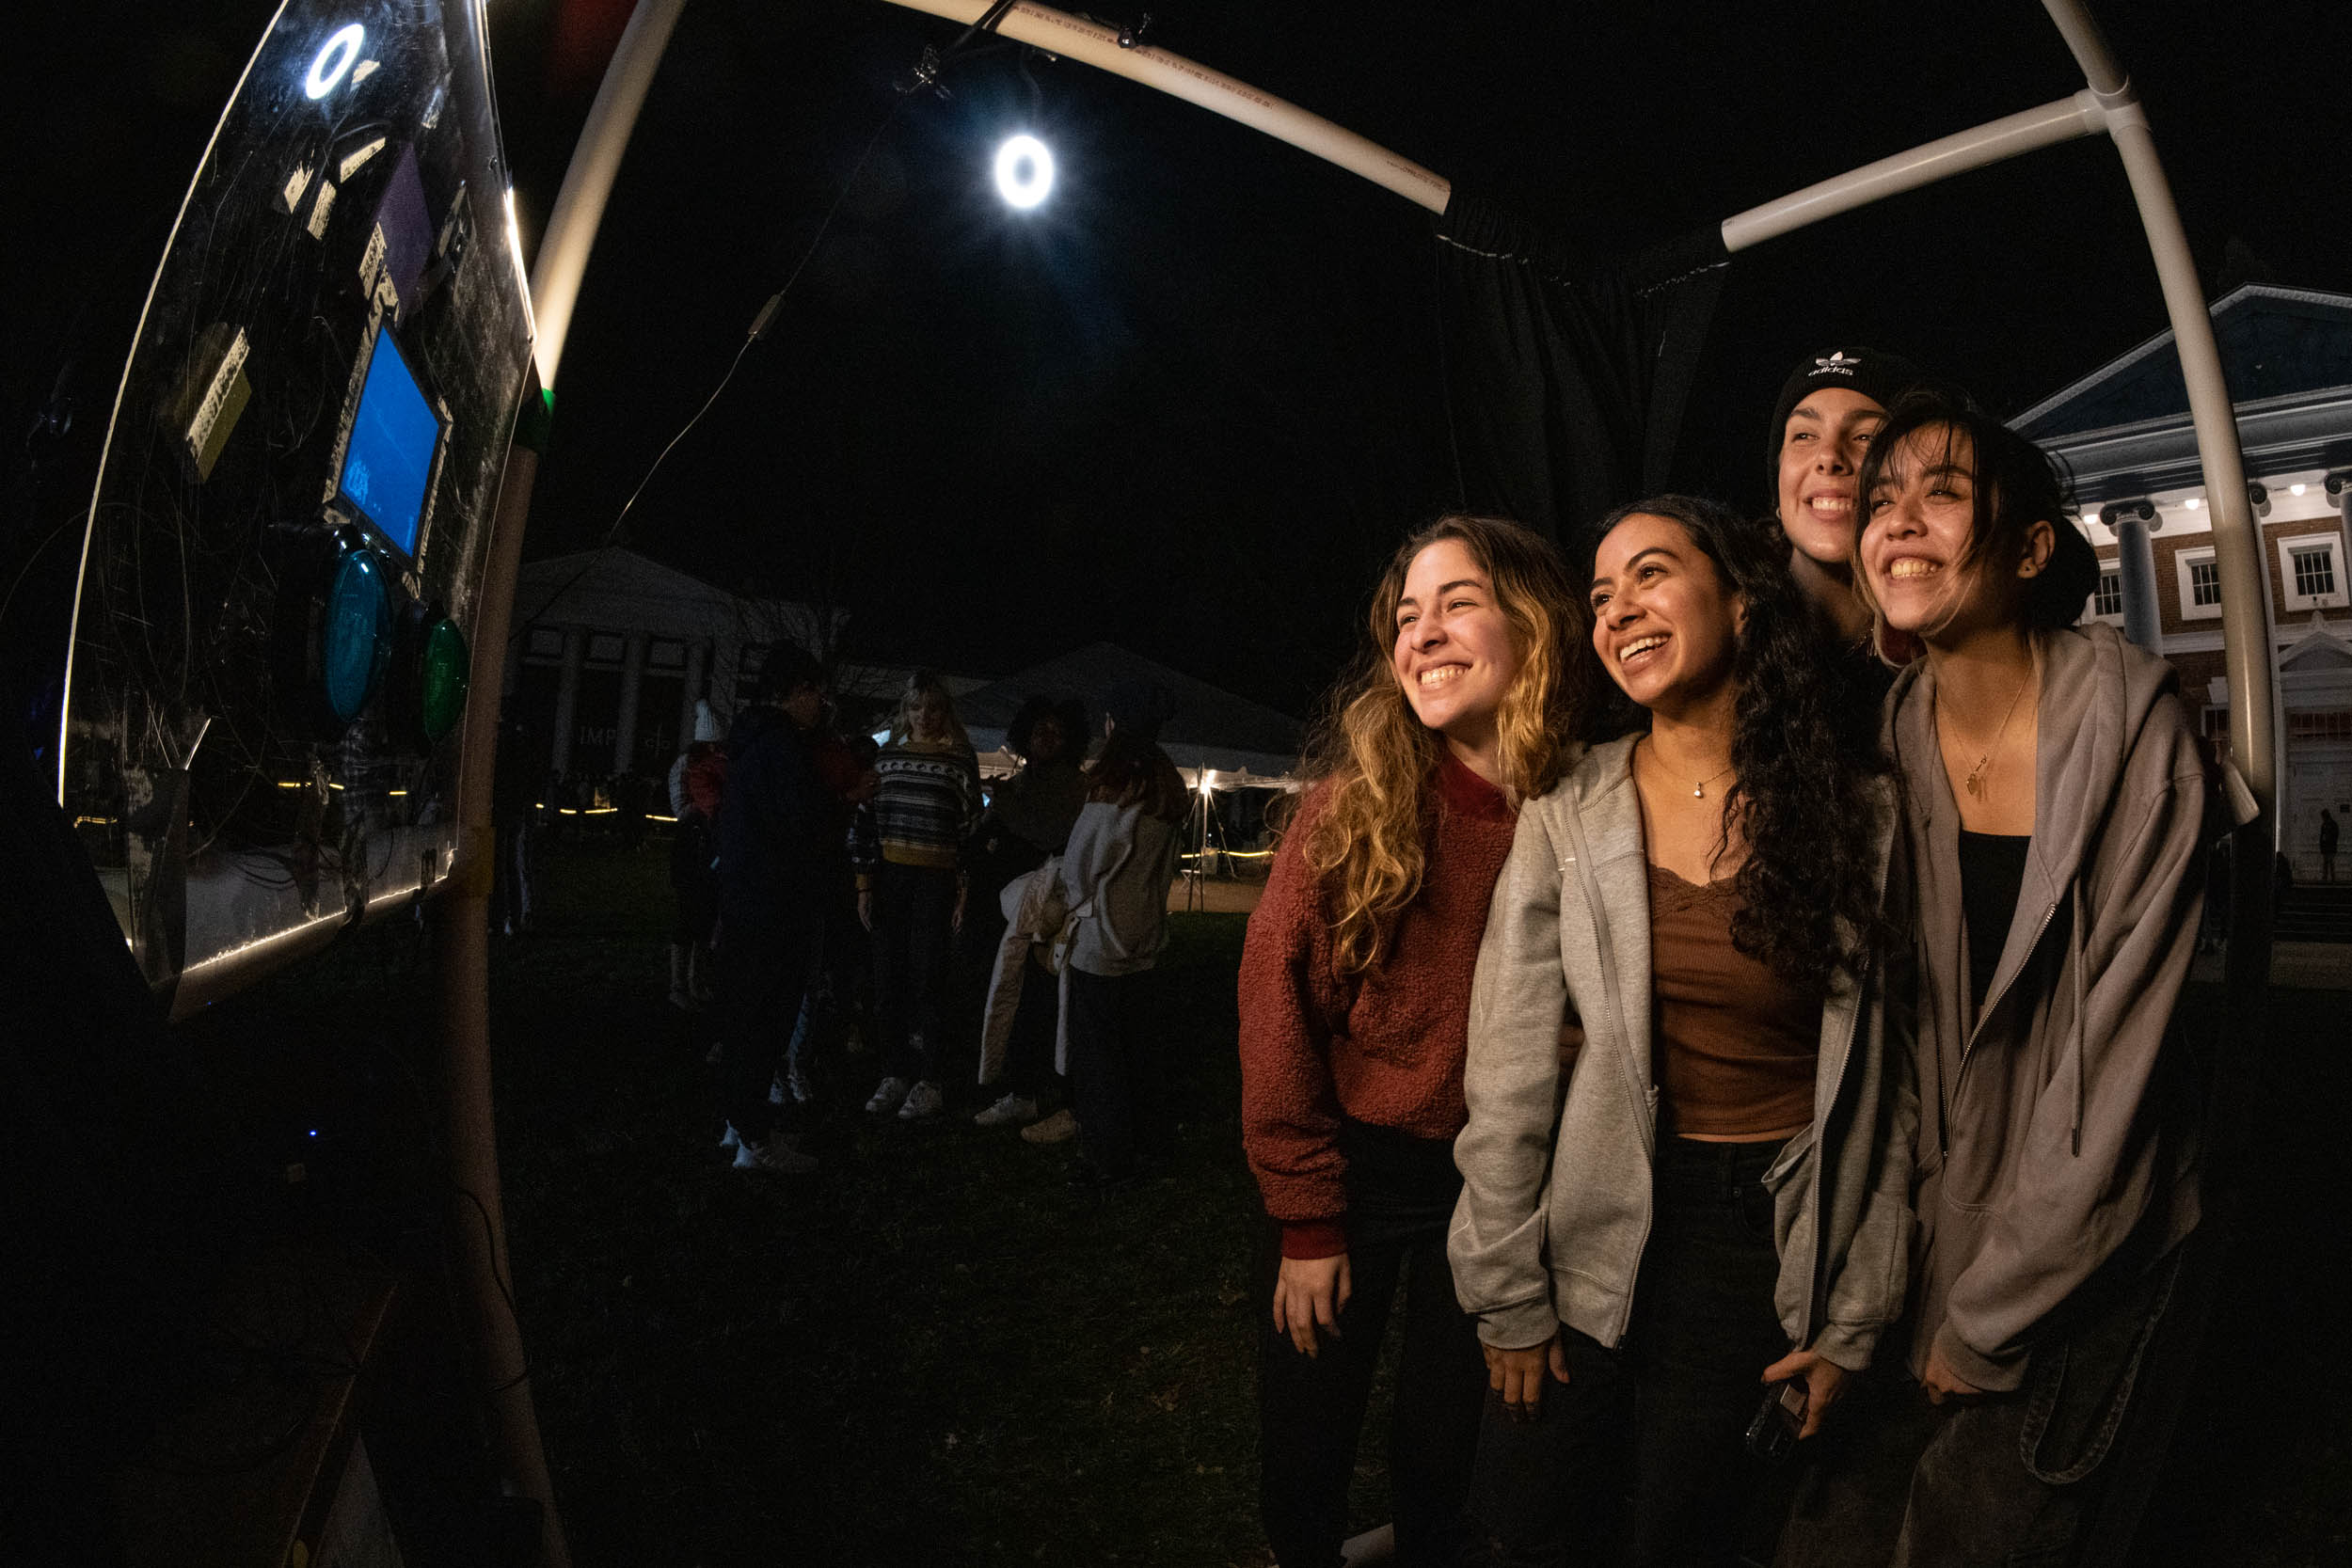 UVA Students taking a photo together from a photo booth